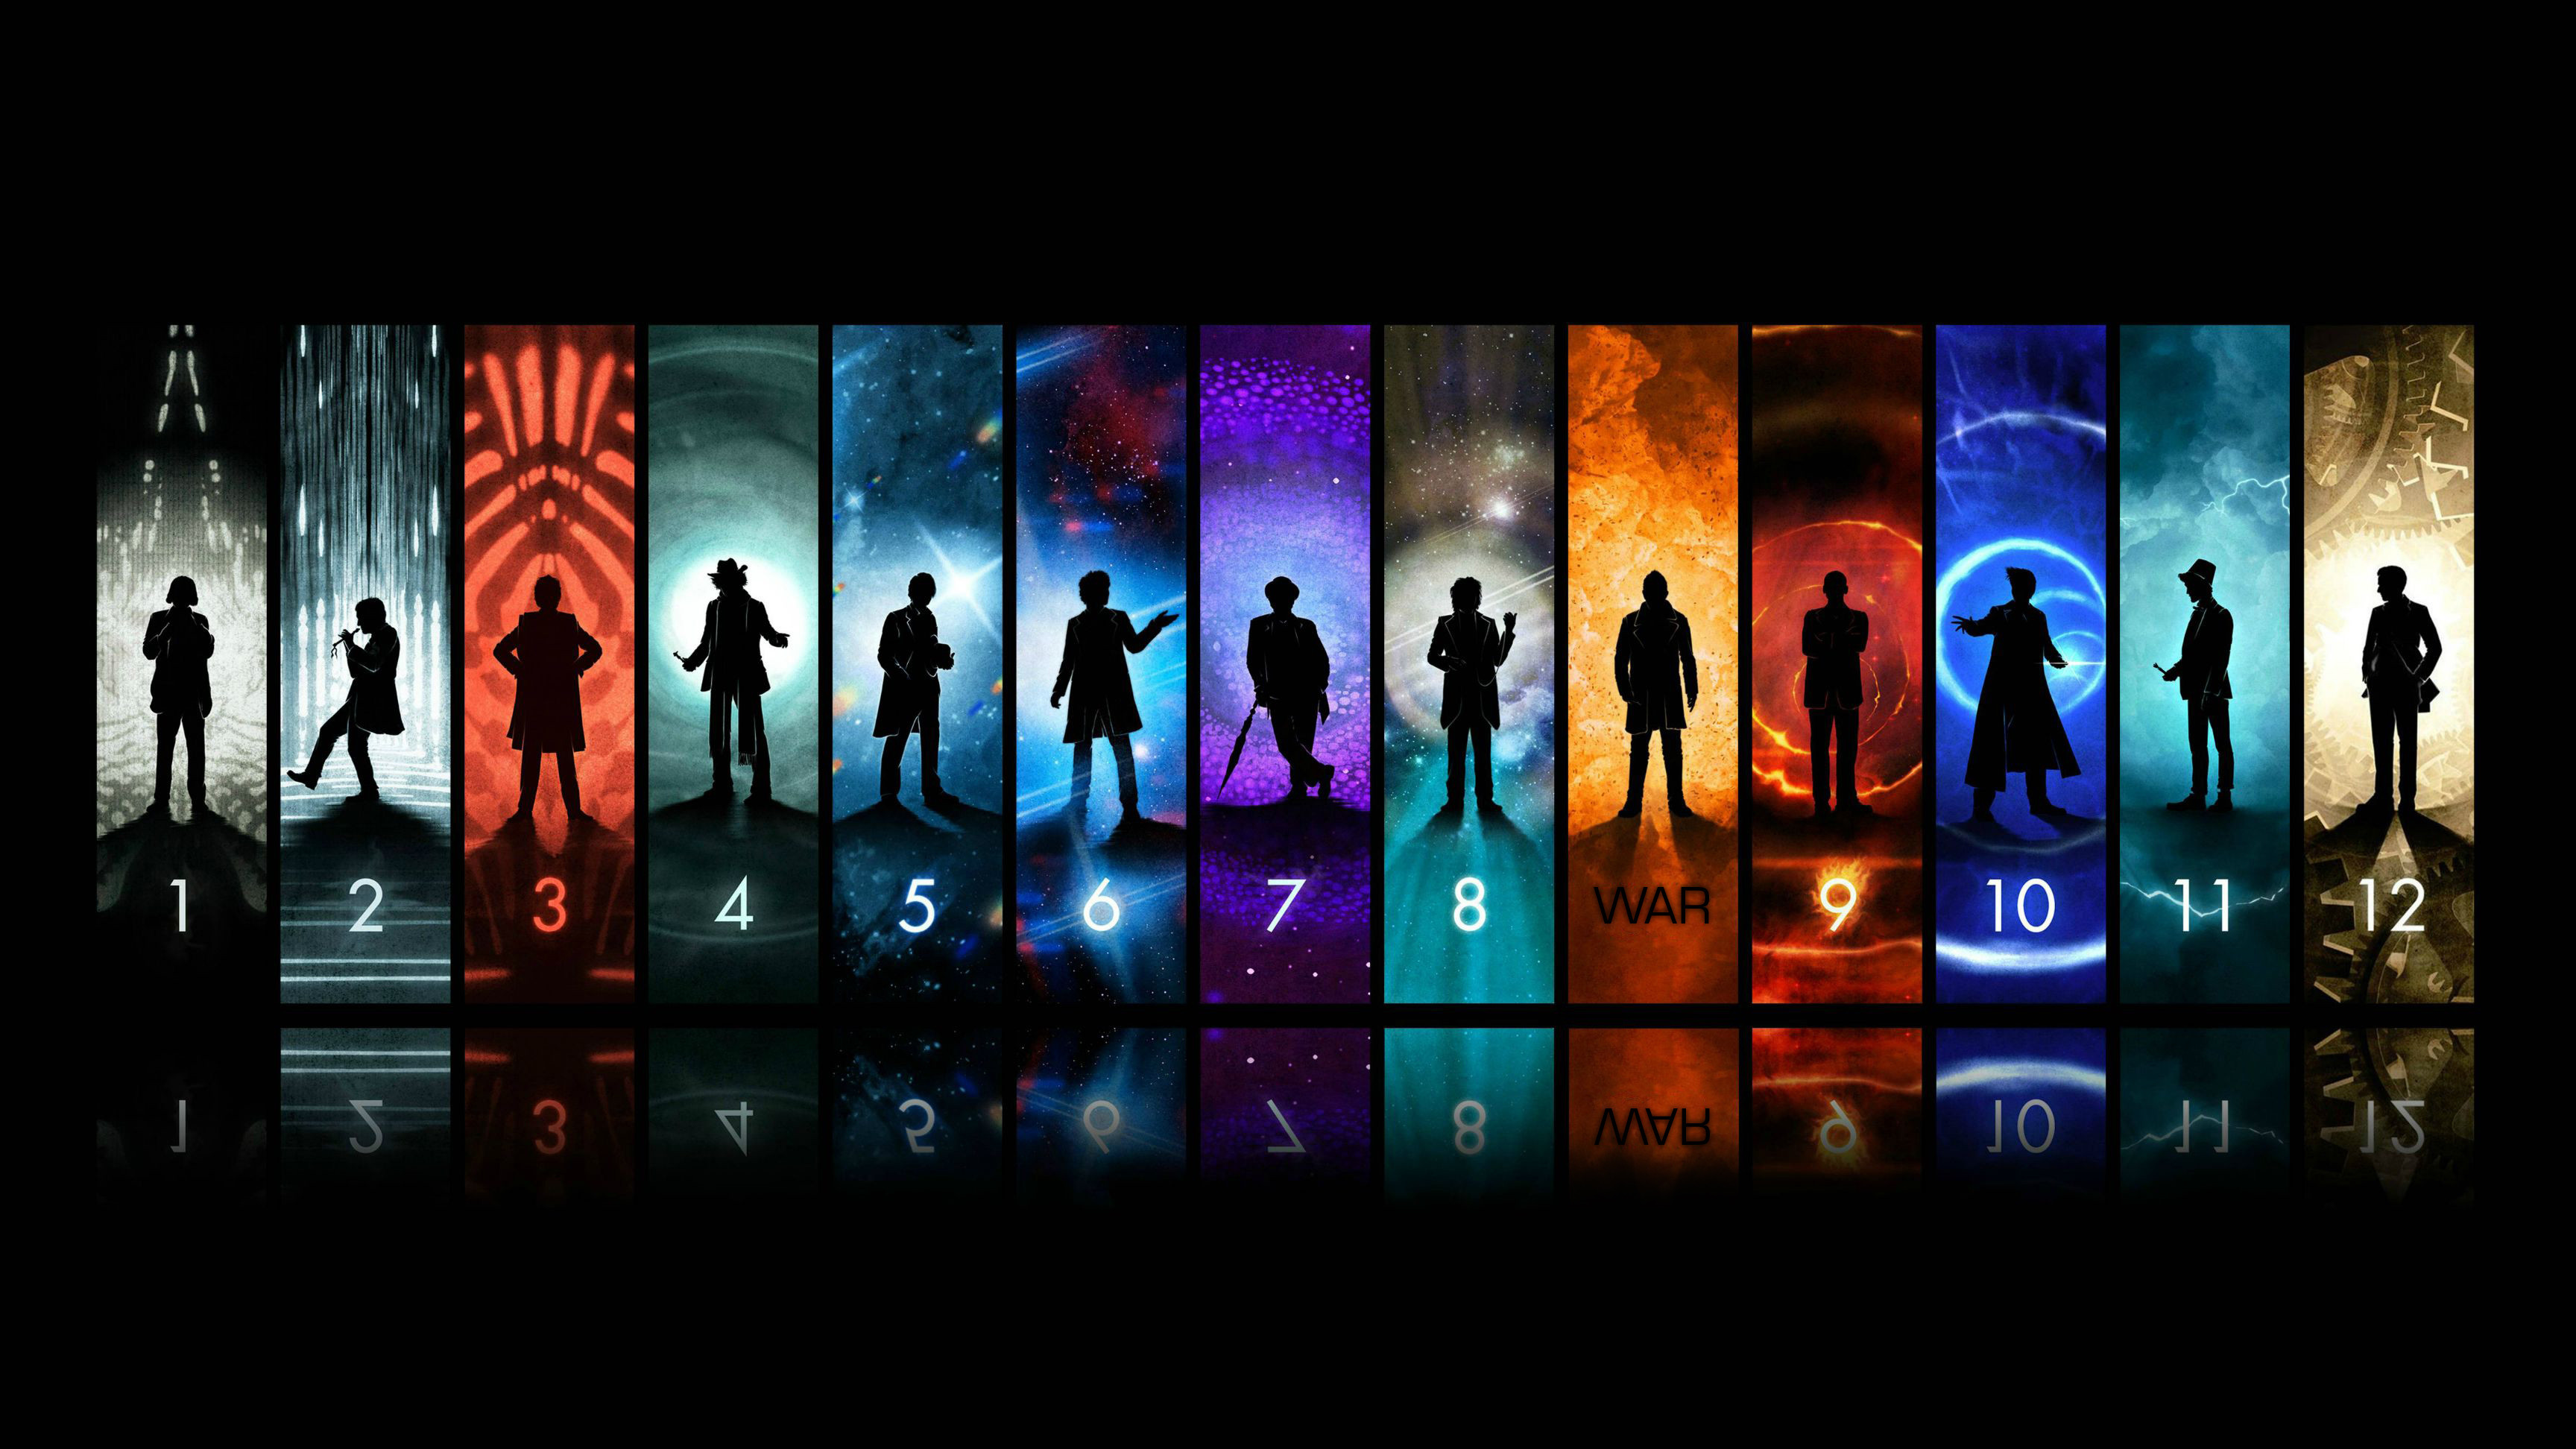 Of A Doctor Who Wallpaper Posted On To Alter The War S